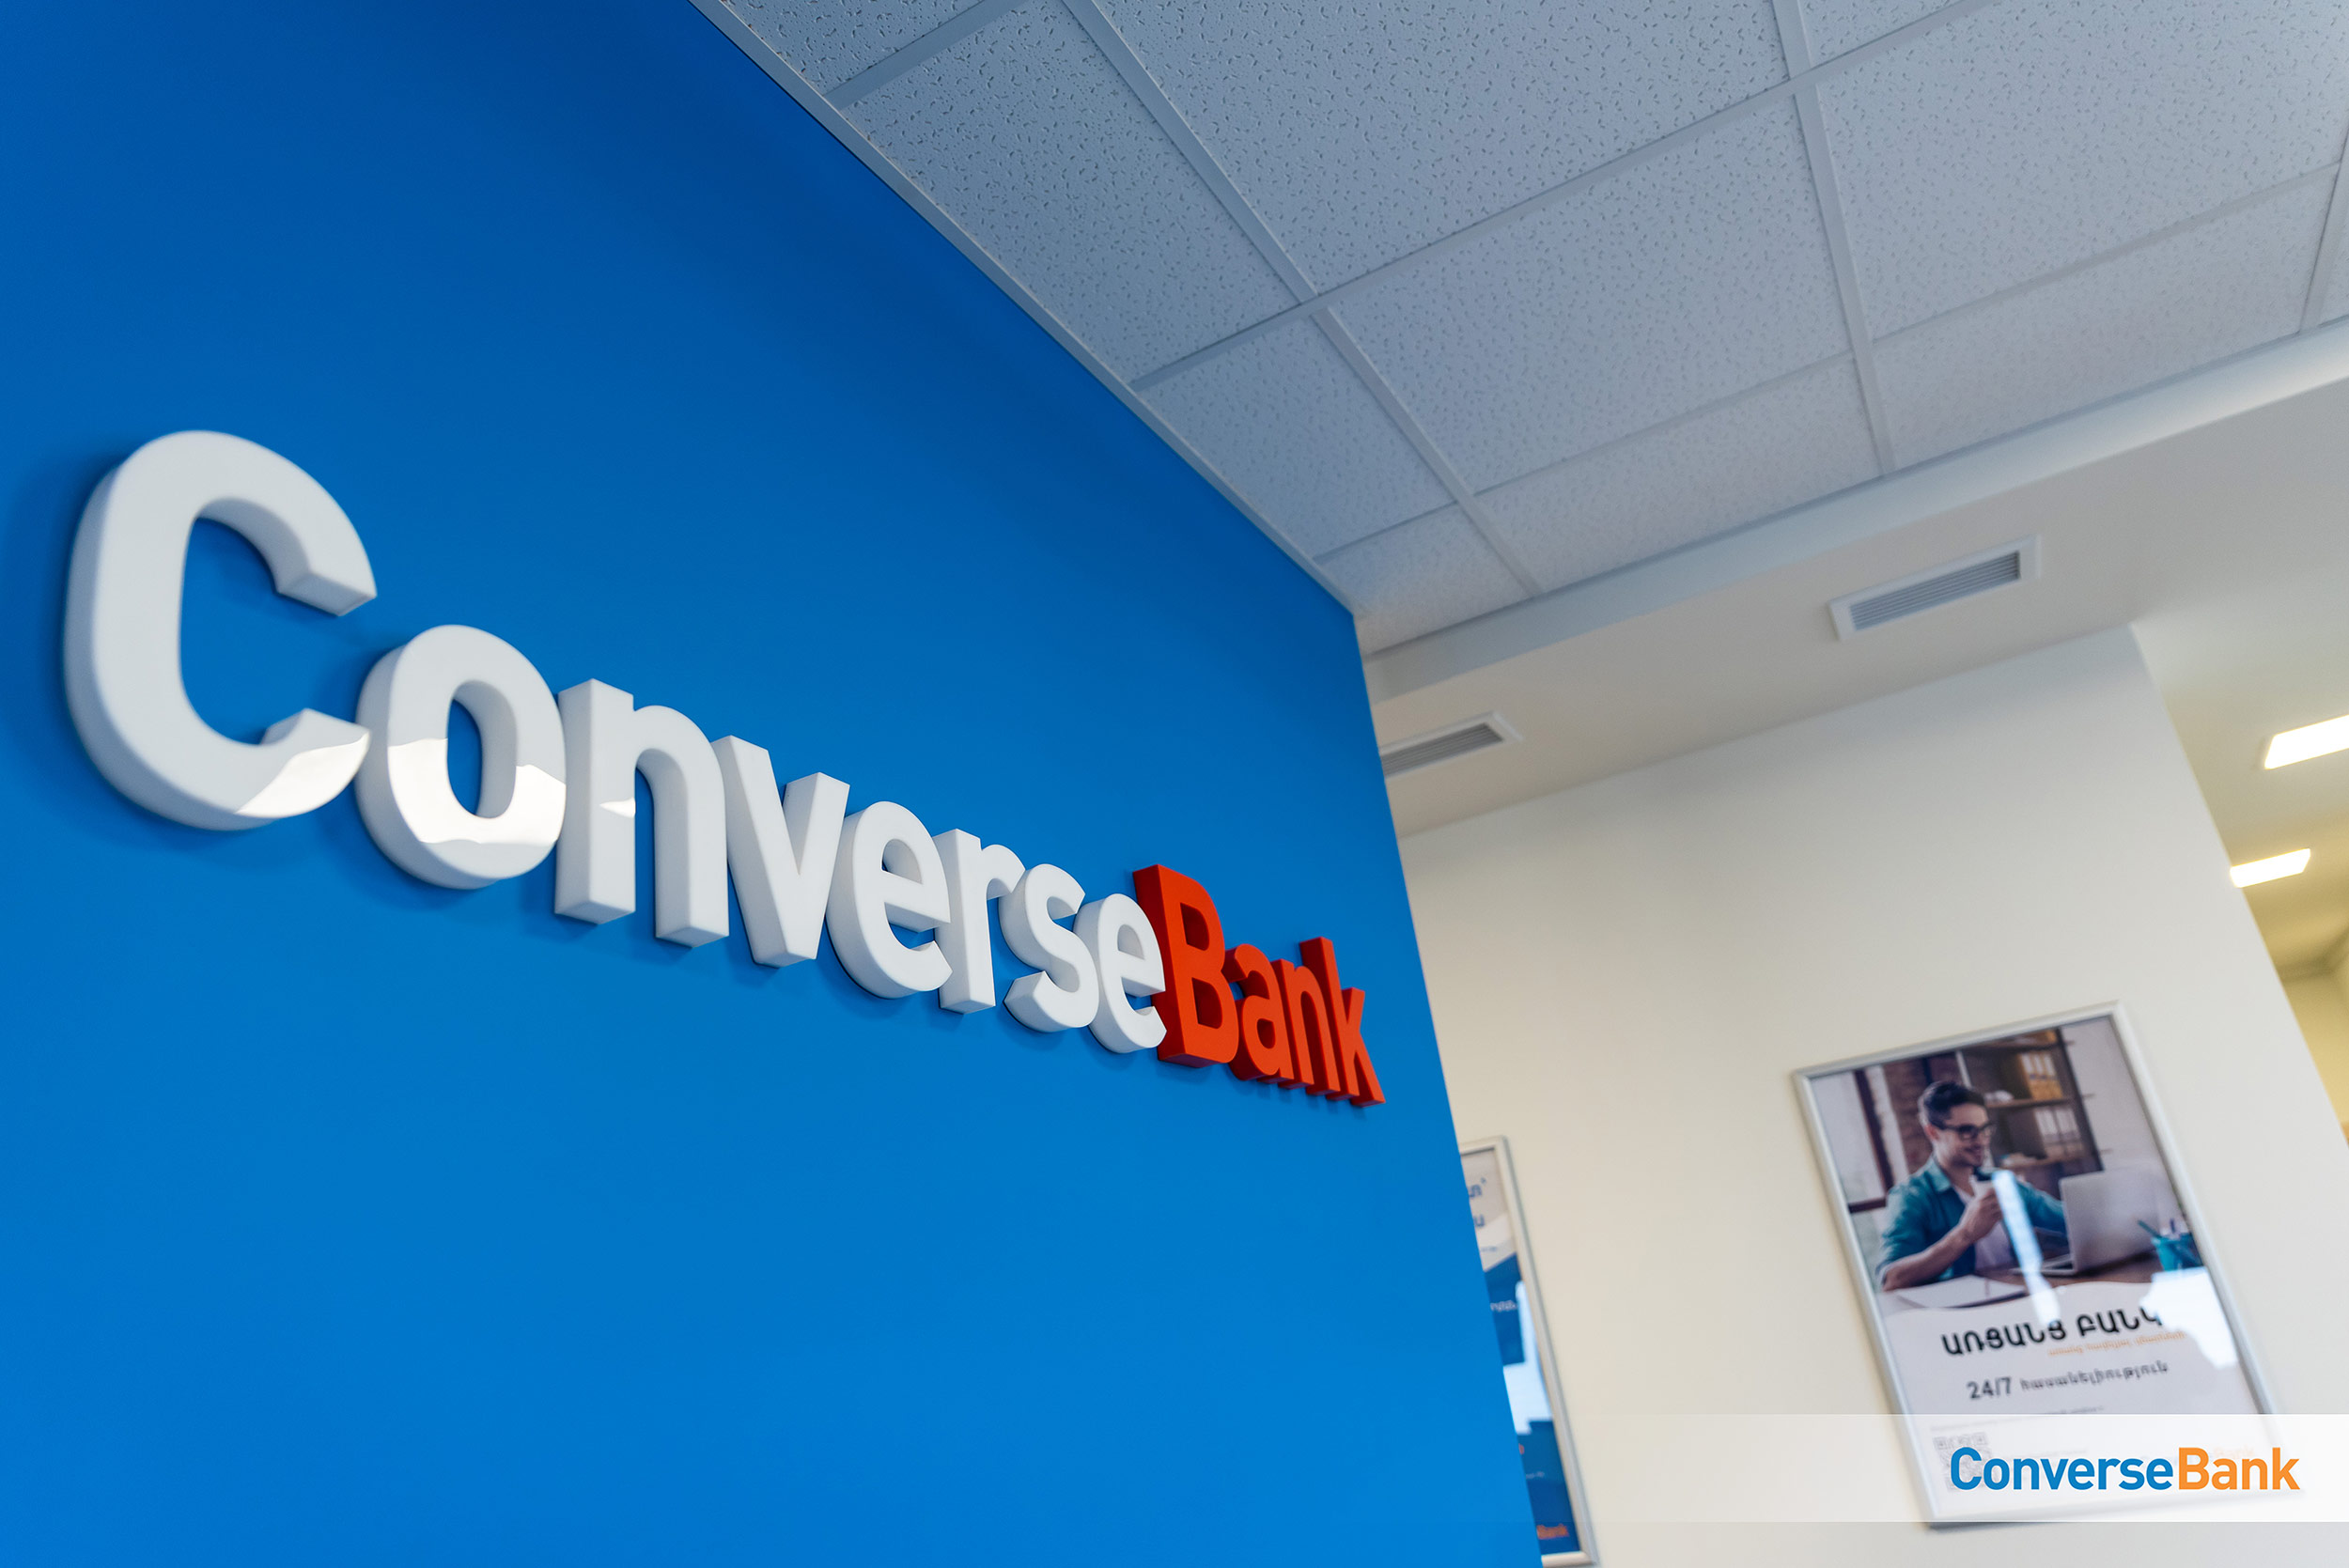 Converse Bank Opened a New Branch “Arshakunyats” in One of the Busiest Parts of Yerevan 3